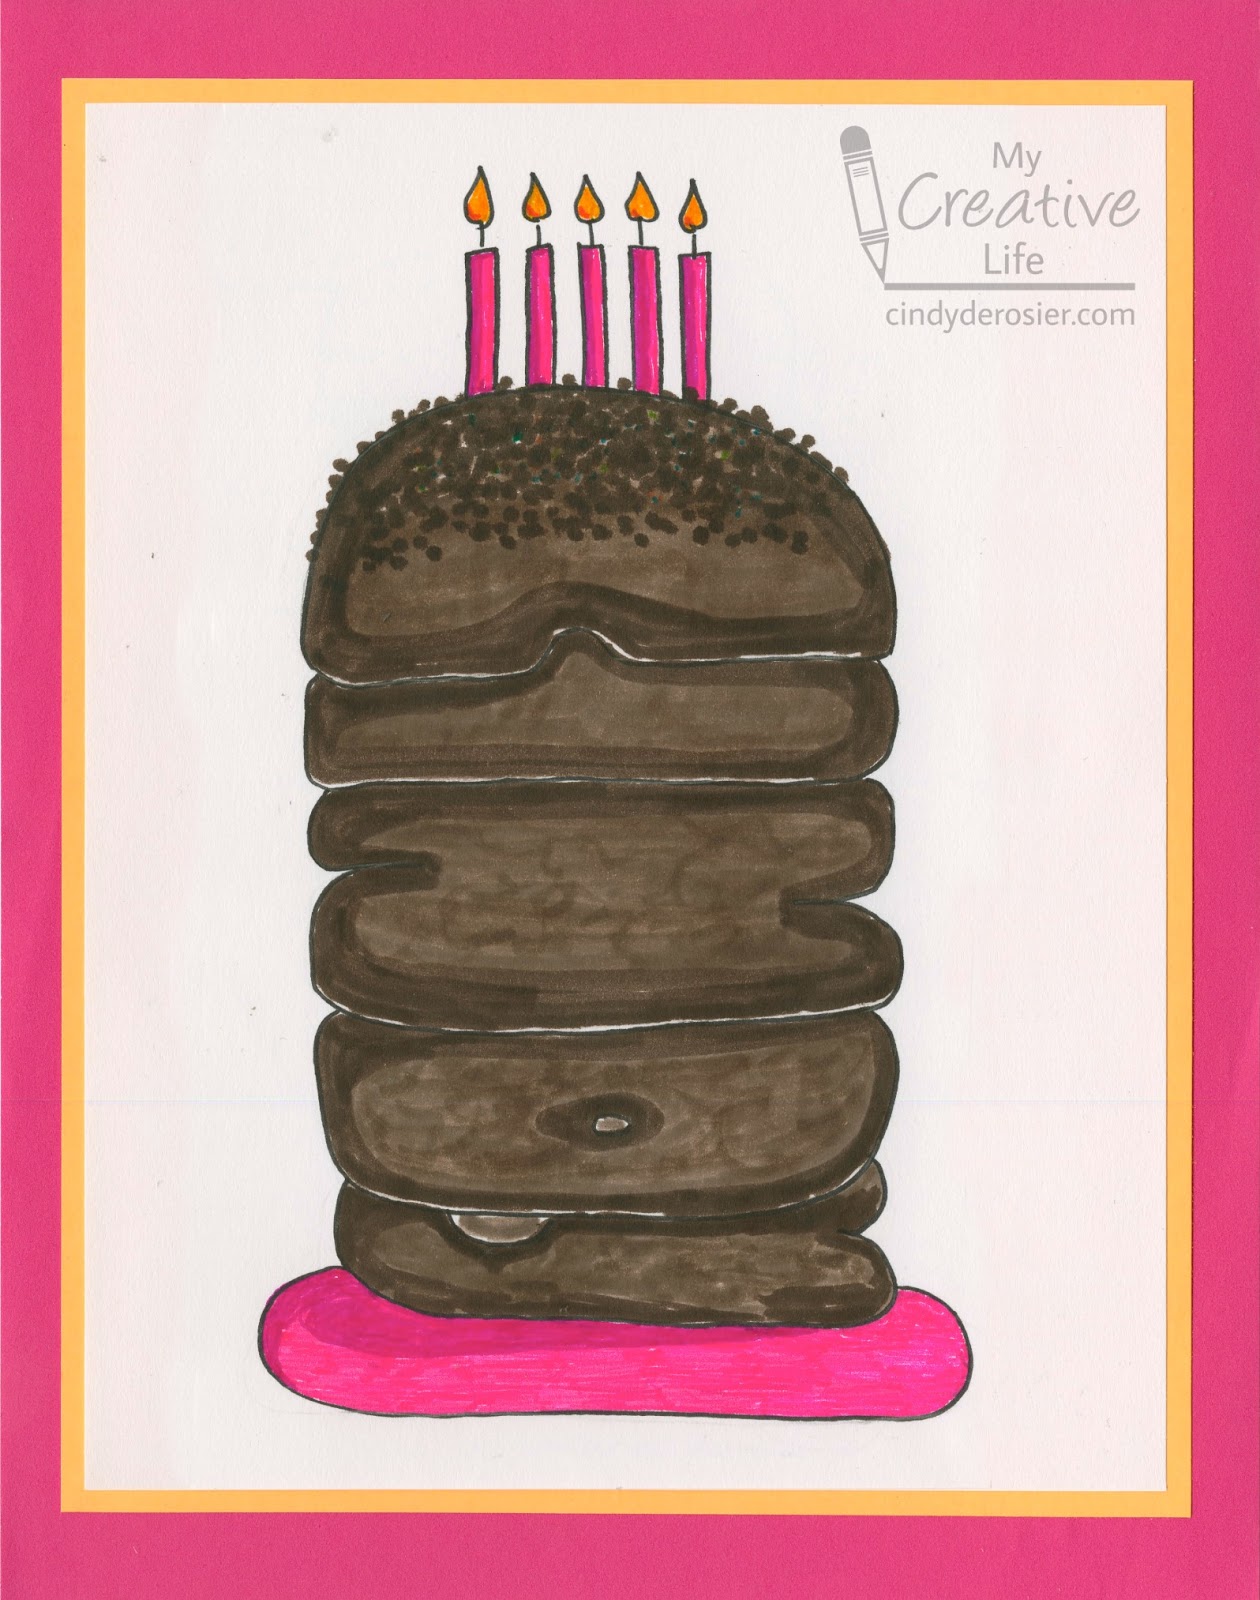 Cake & Candles Mini Pop-Up Birthday Greeting Card | Cards